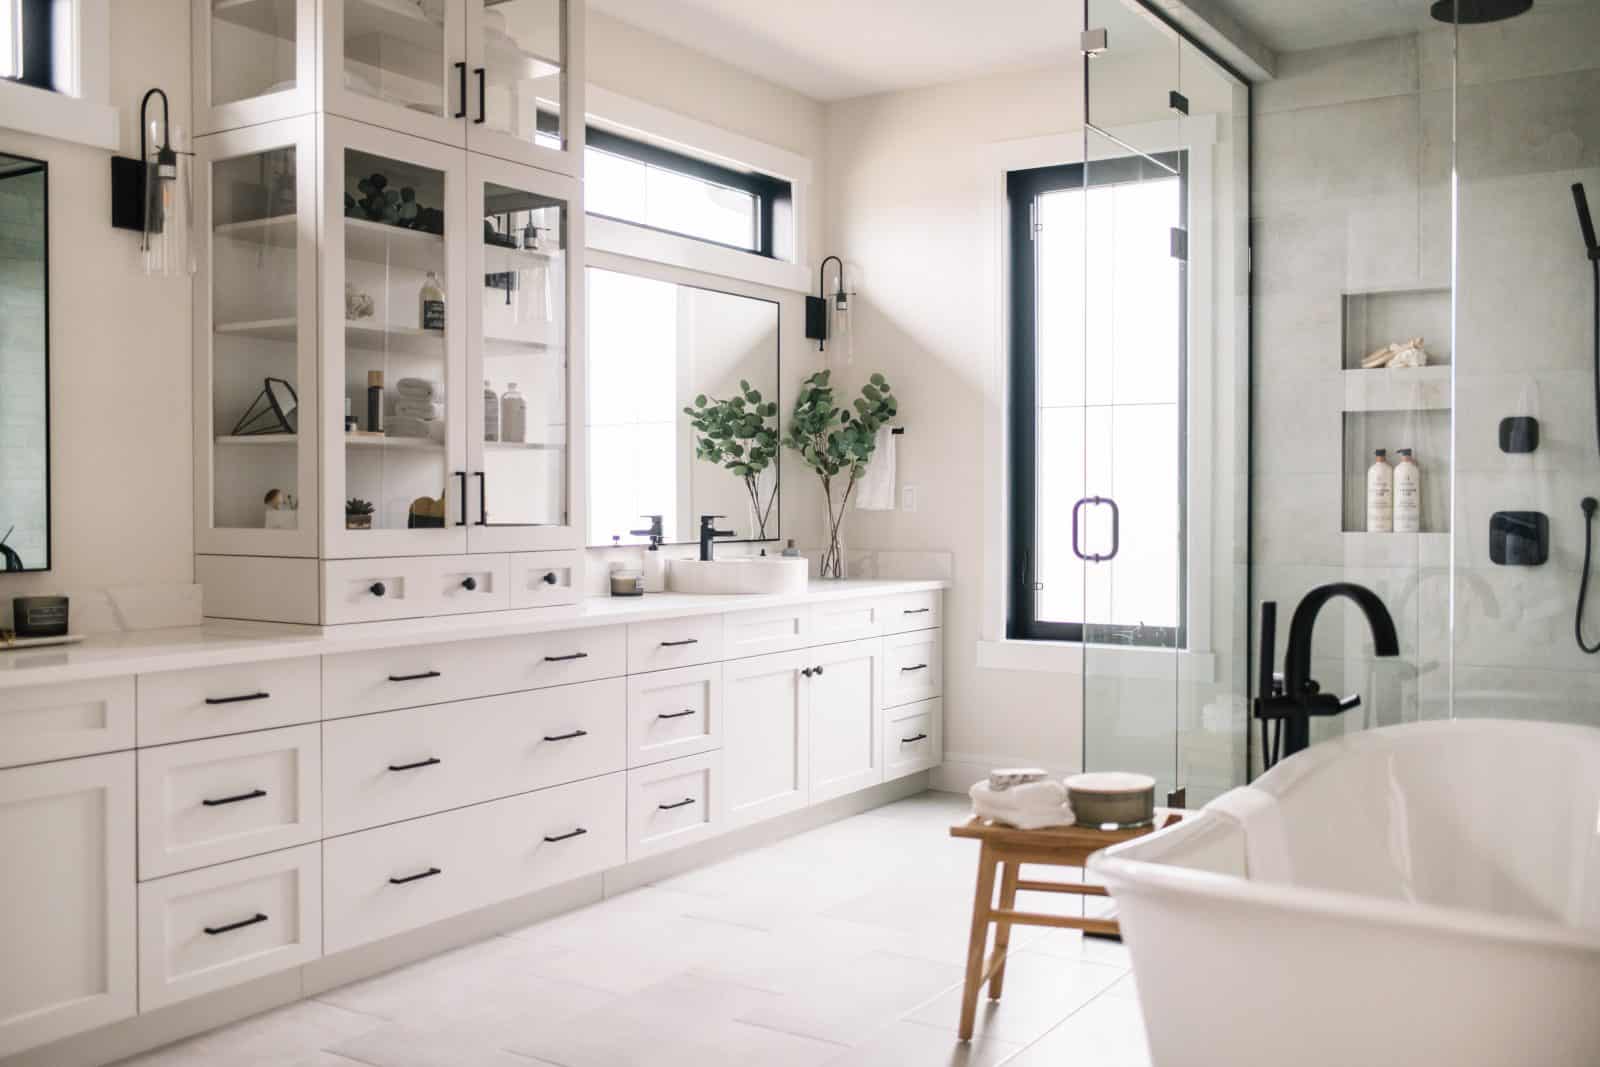 huge bathroom with white cabinets, counters, floor and large soaker tub Immense salle de bain avec armoires blanches, comptoirs, plancher et grande baignoire trempette.